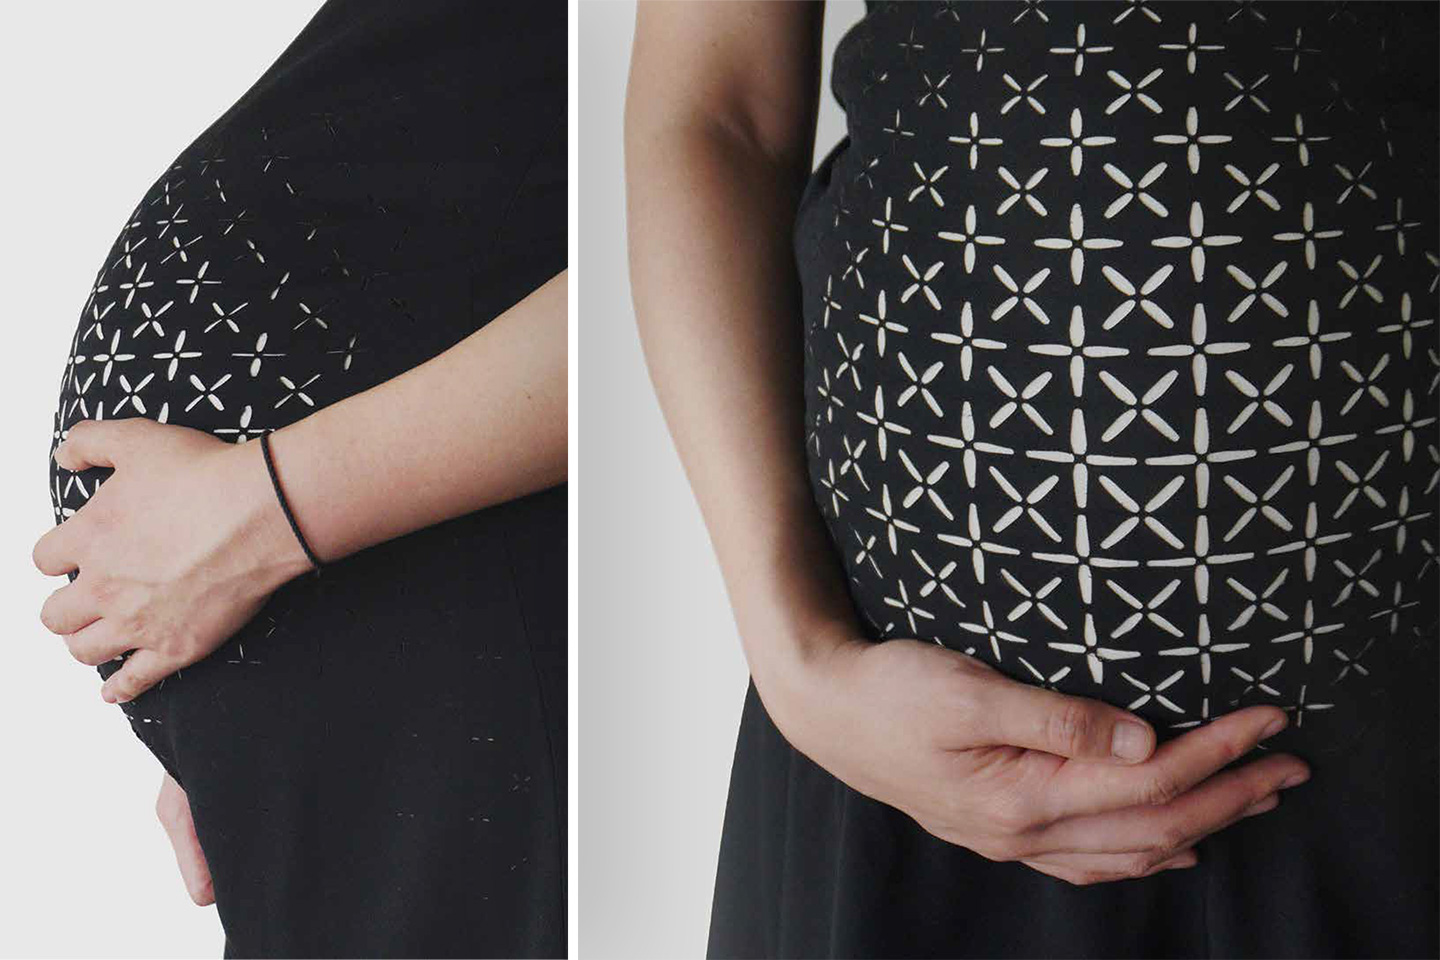 #This award-winning expanding garment was designed for pregnant women to wear to term